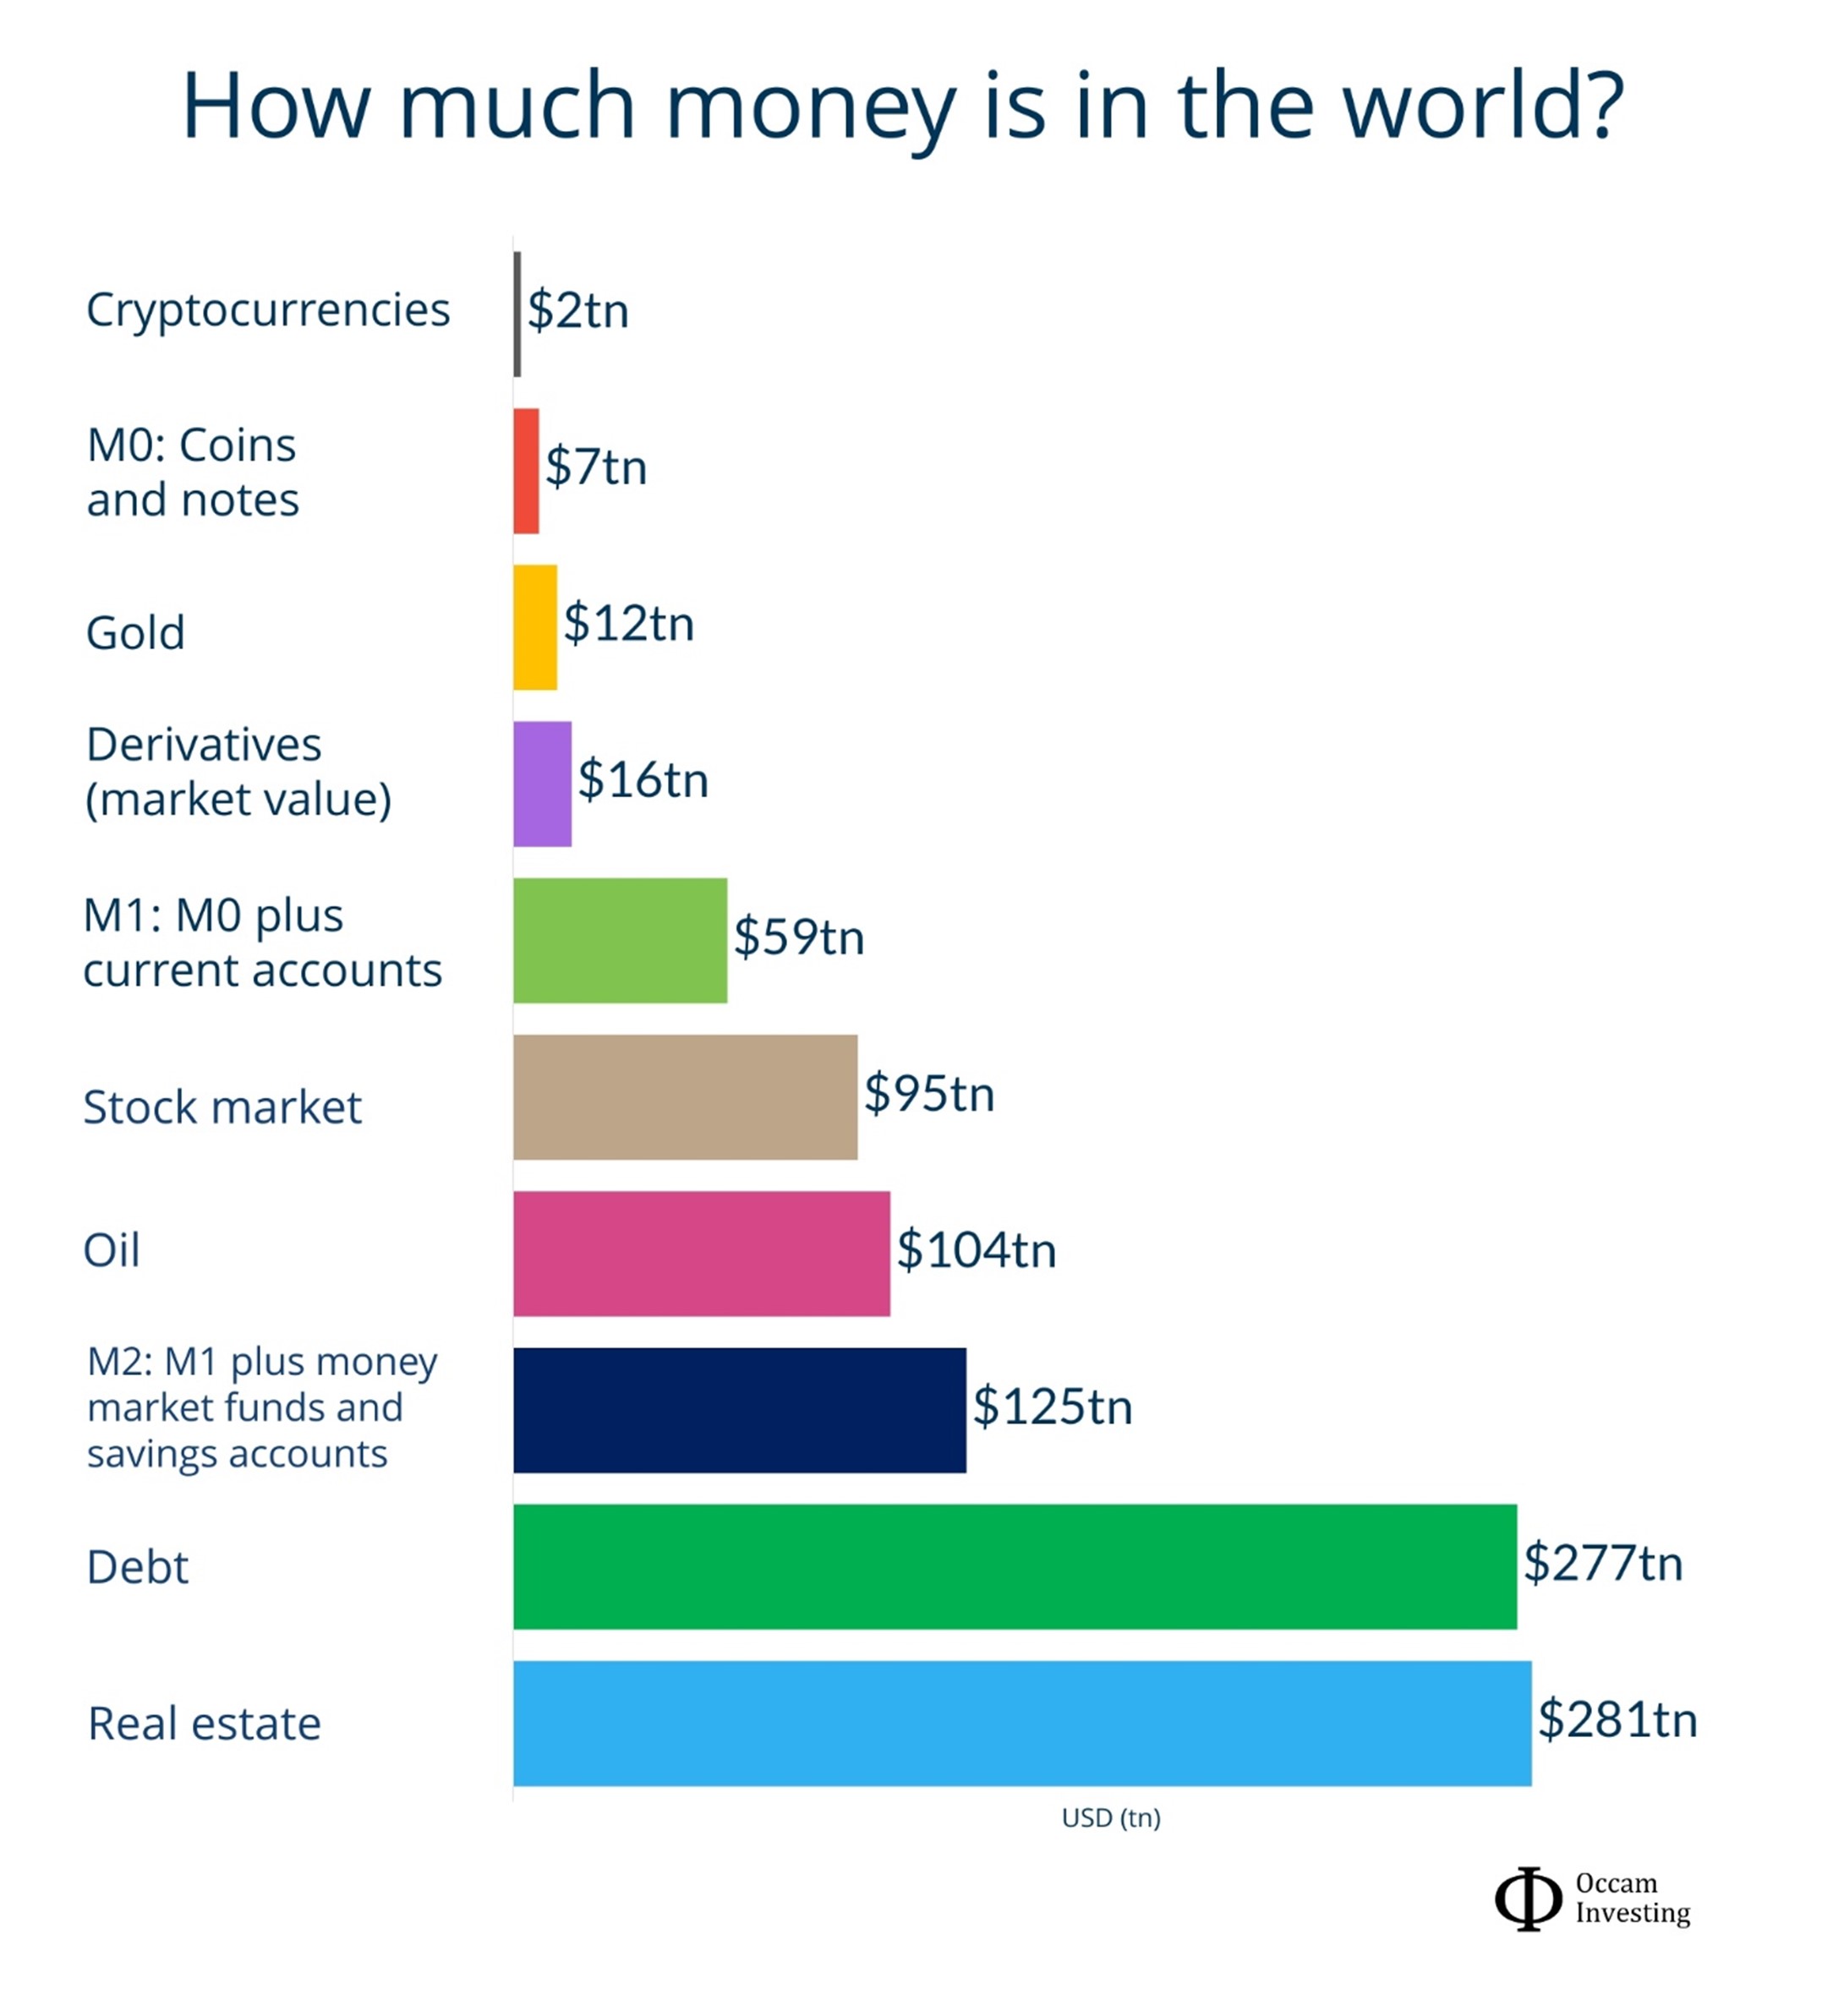 How much wealth gets you into the global top 1%?